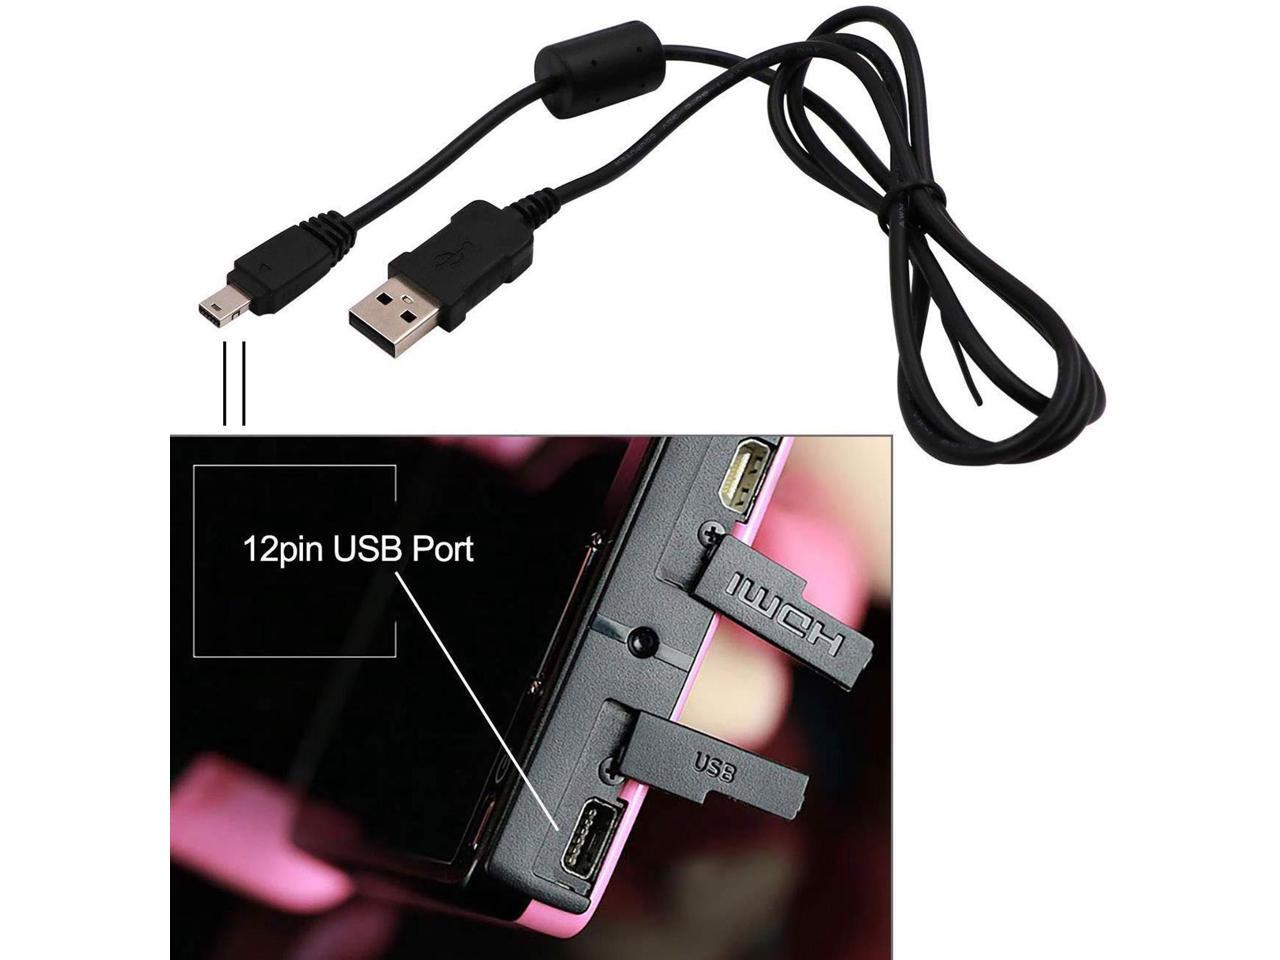 for Garmin VIRB X/XE Charge Line USB Data/Charging Cable Adapter 1m Black